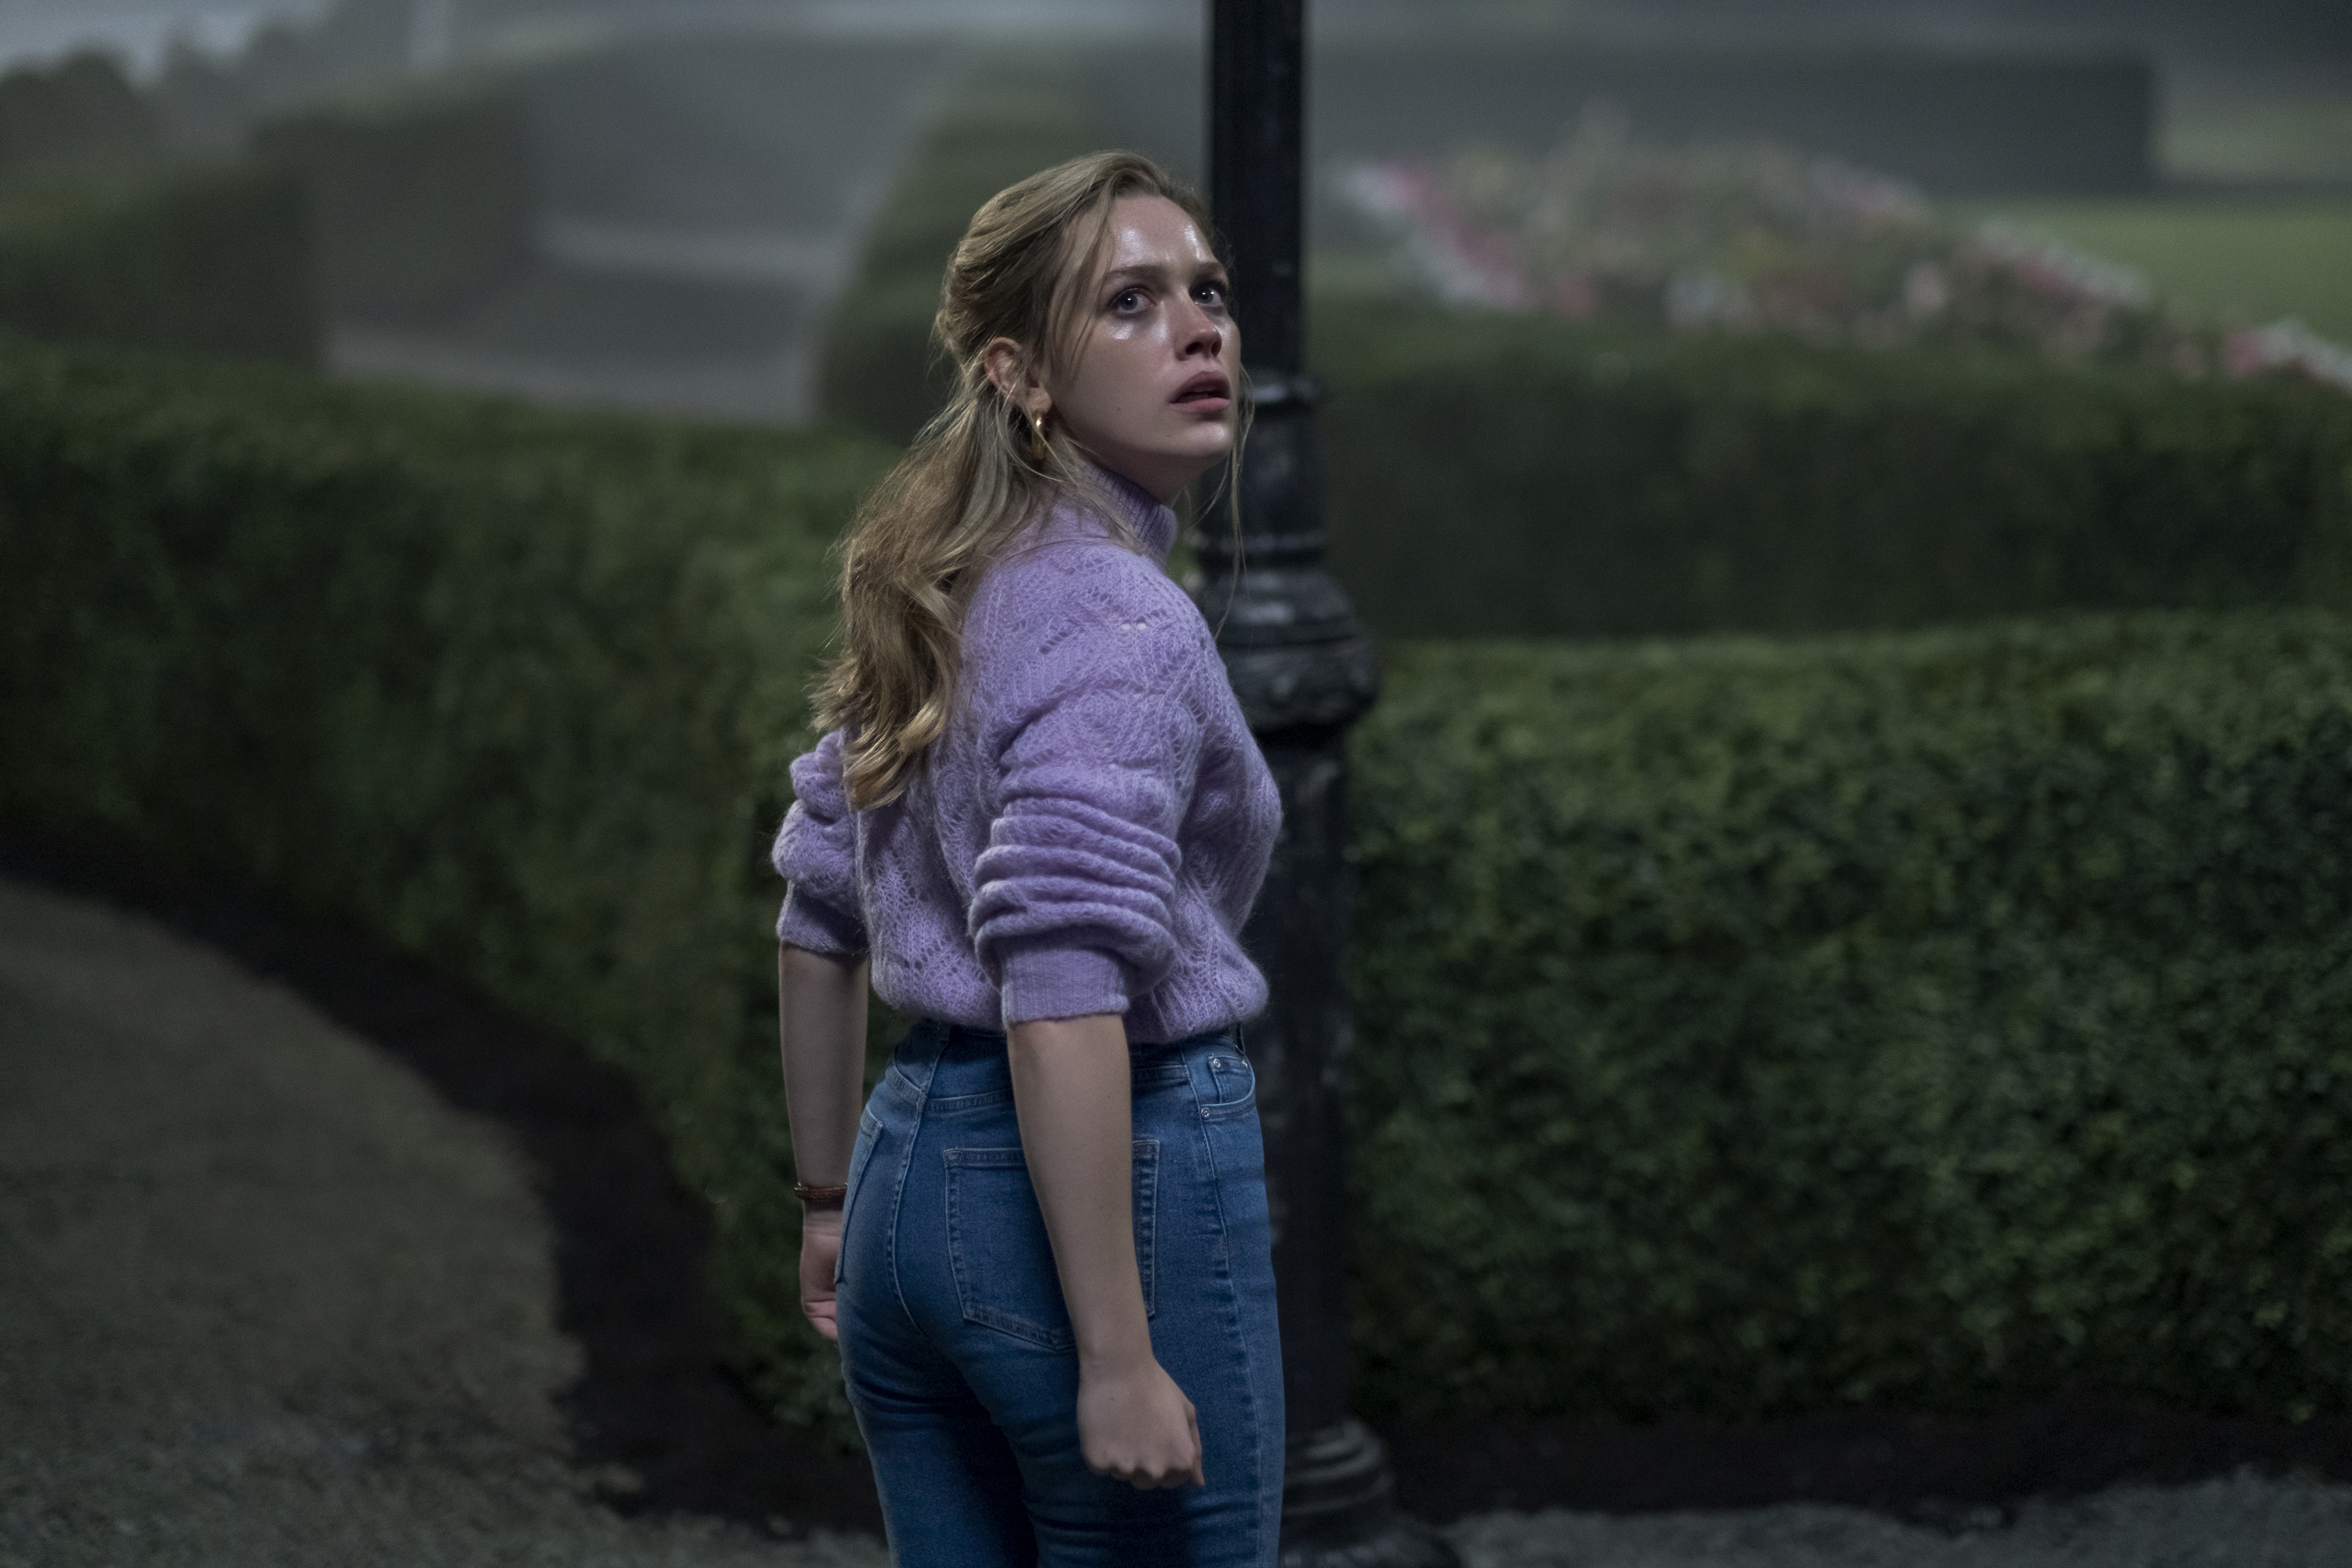 THE HAUNTING OF BLY MANOR (L to R) VICTORIA PEDRETTI as DANI in THE HAUNTING OF BLY MANOR Cr. EIKE SCHROTER/NETFLIX © 2020